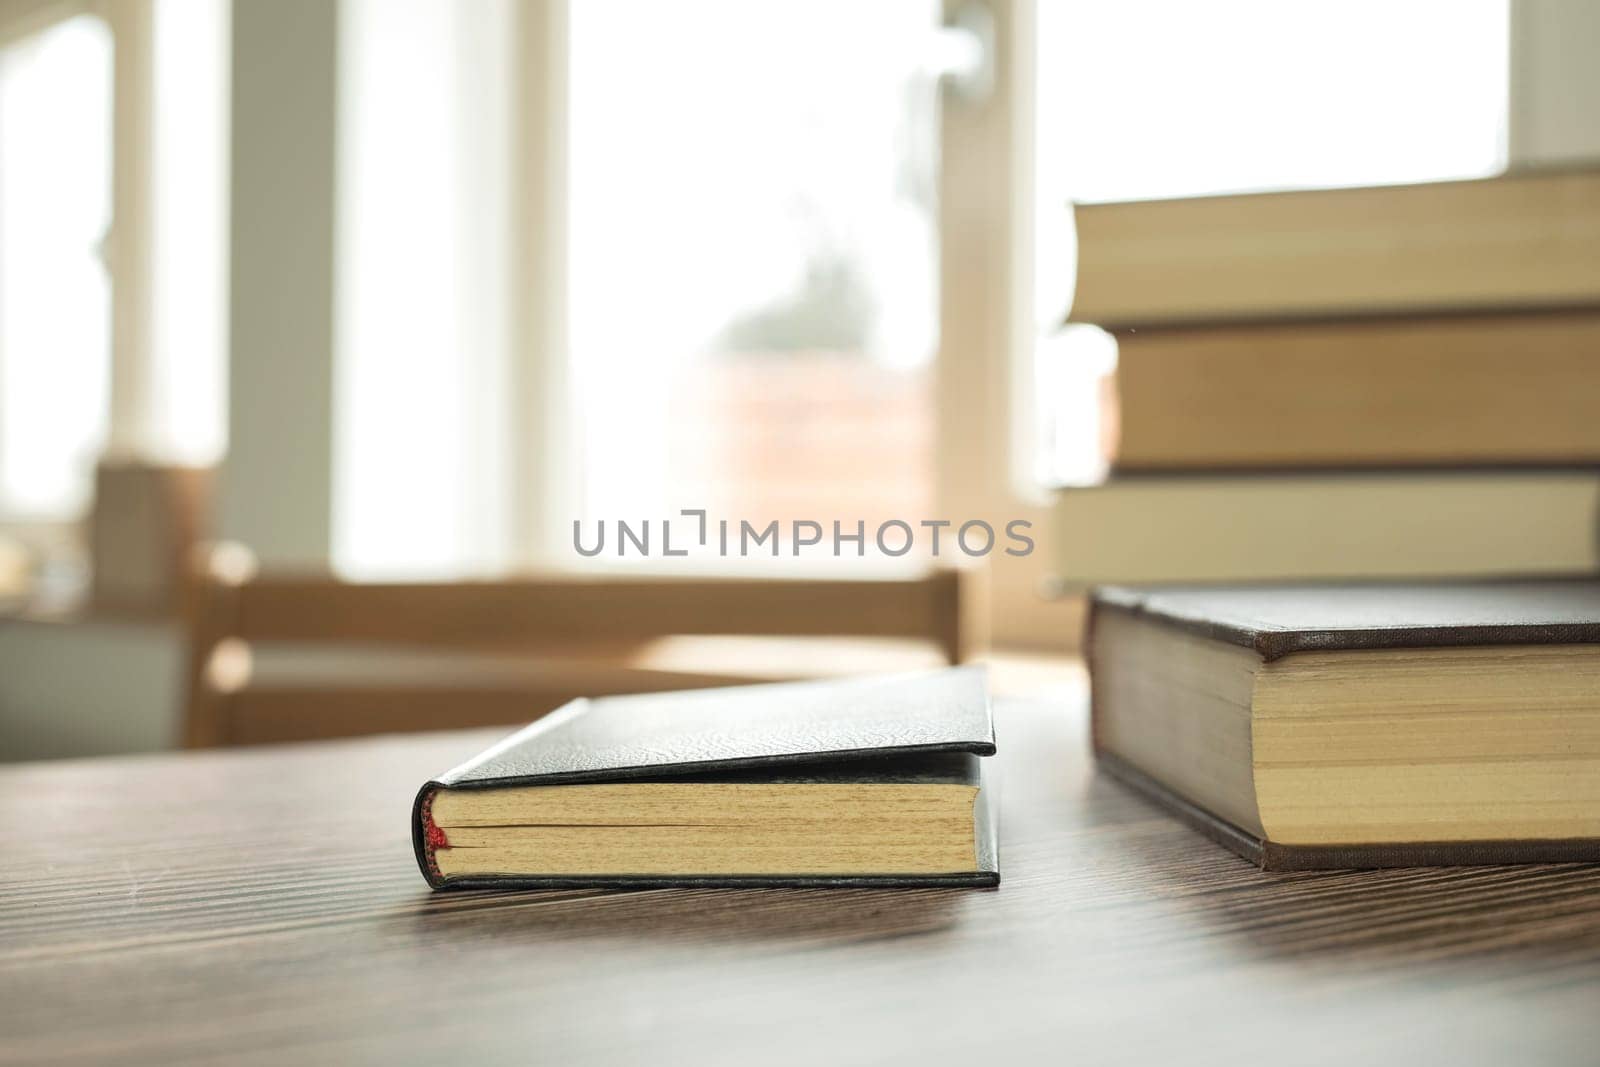 Education learning concept with opening book or textbook at home in office room, stack piles of literature text academic archive on reading desk and aisle of bookshelves in school study class room background interior by Annebel146